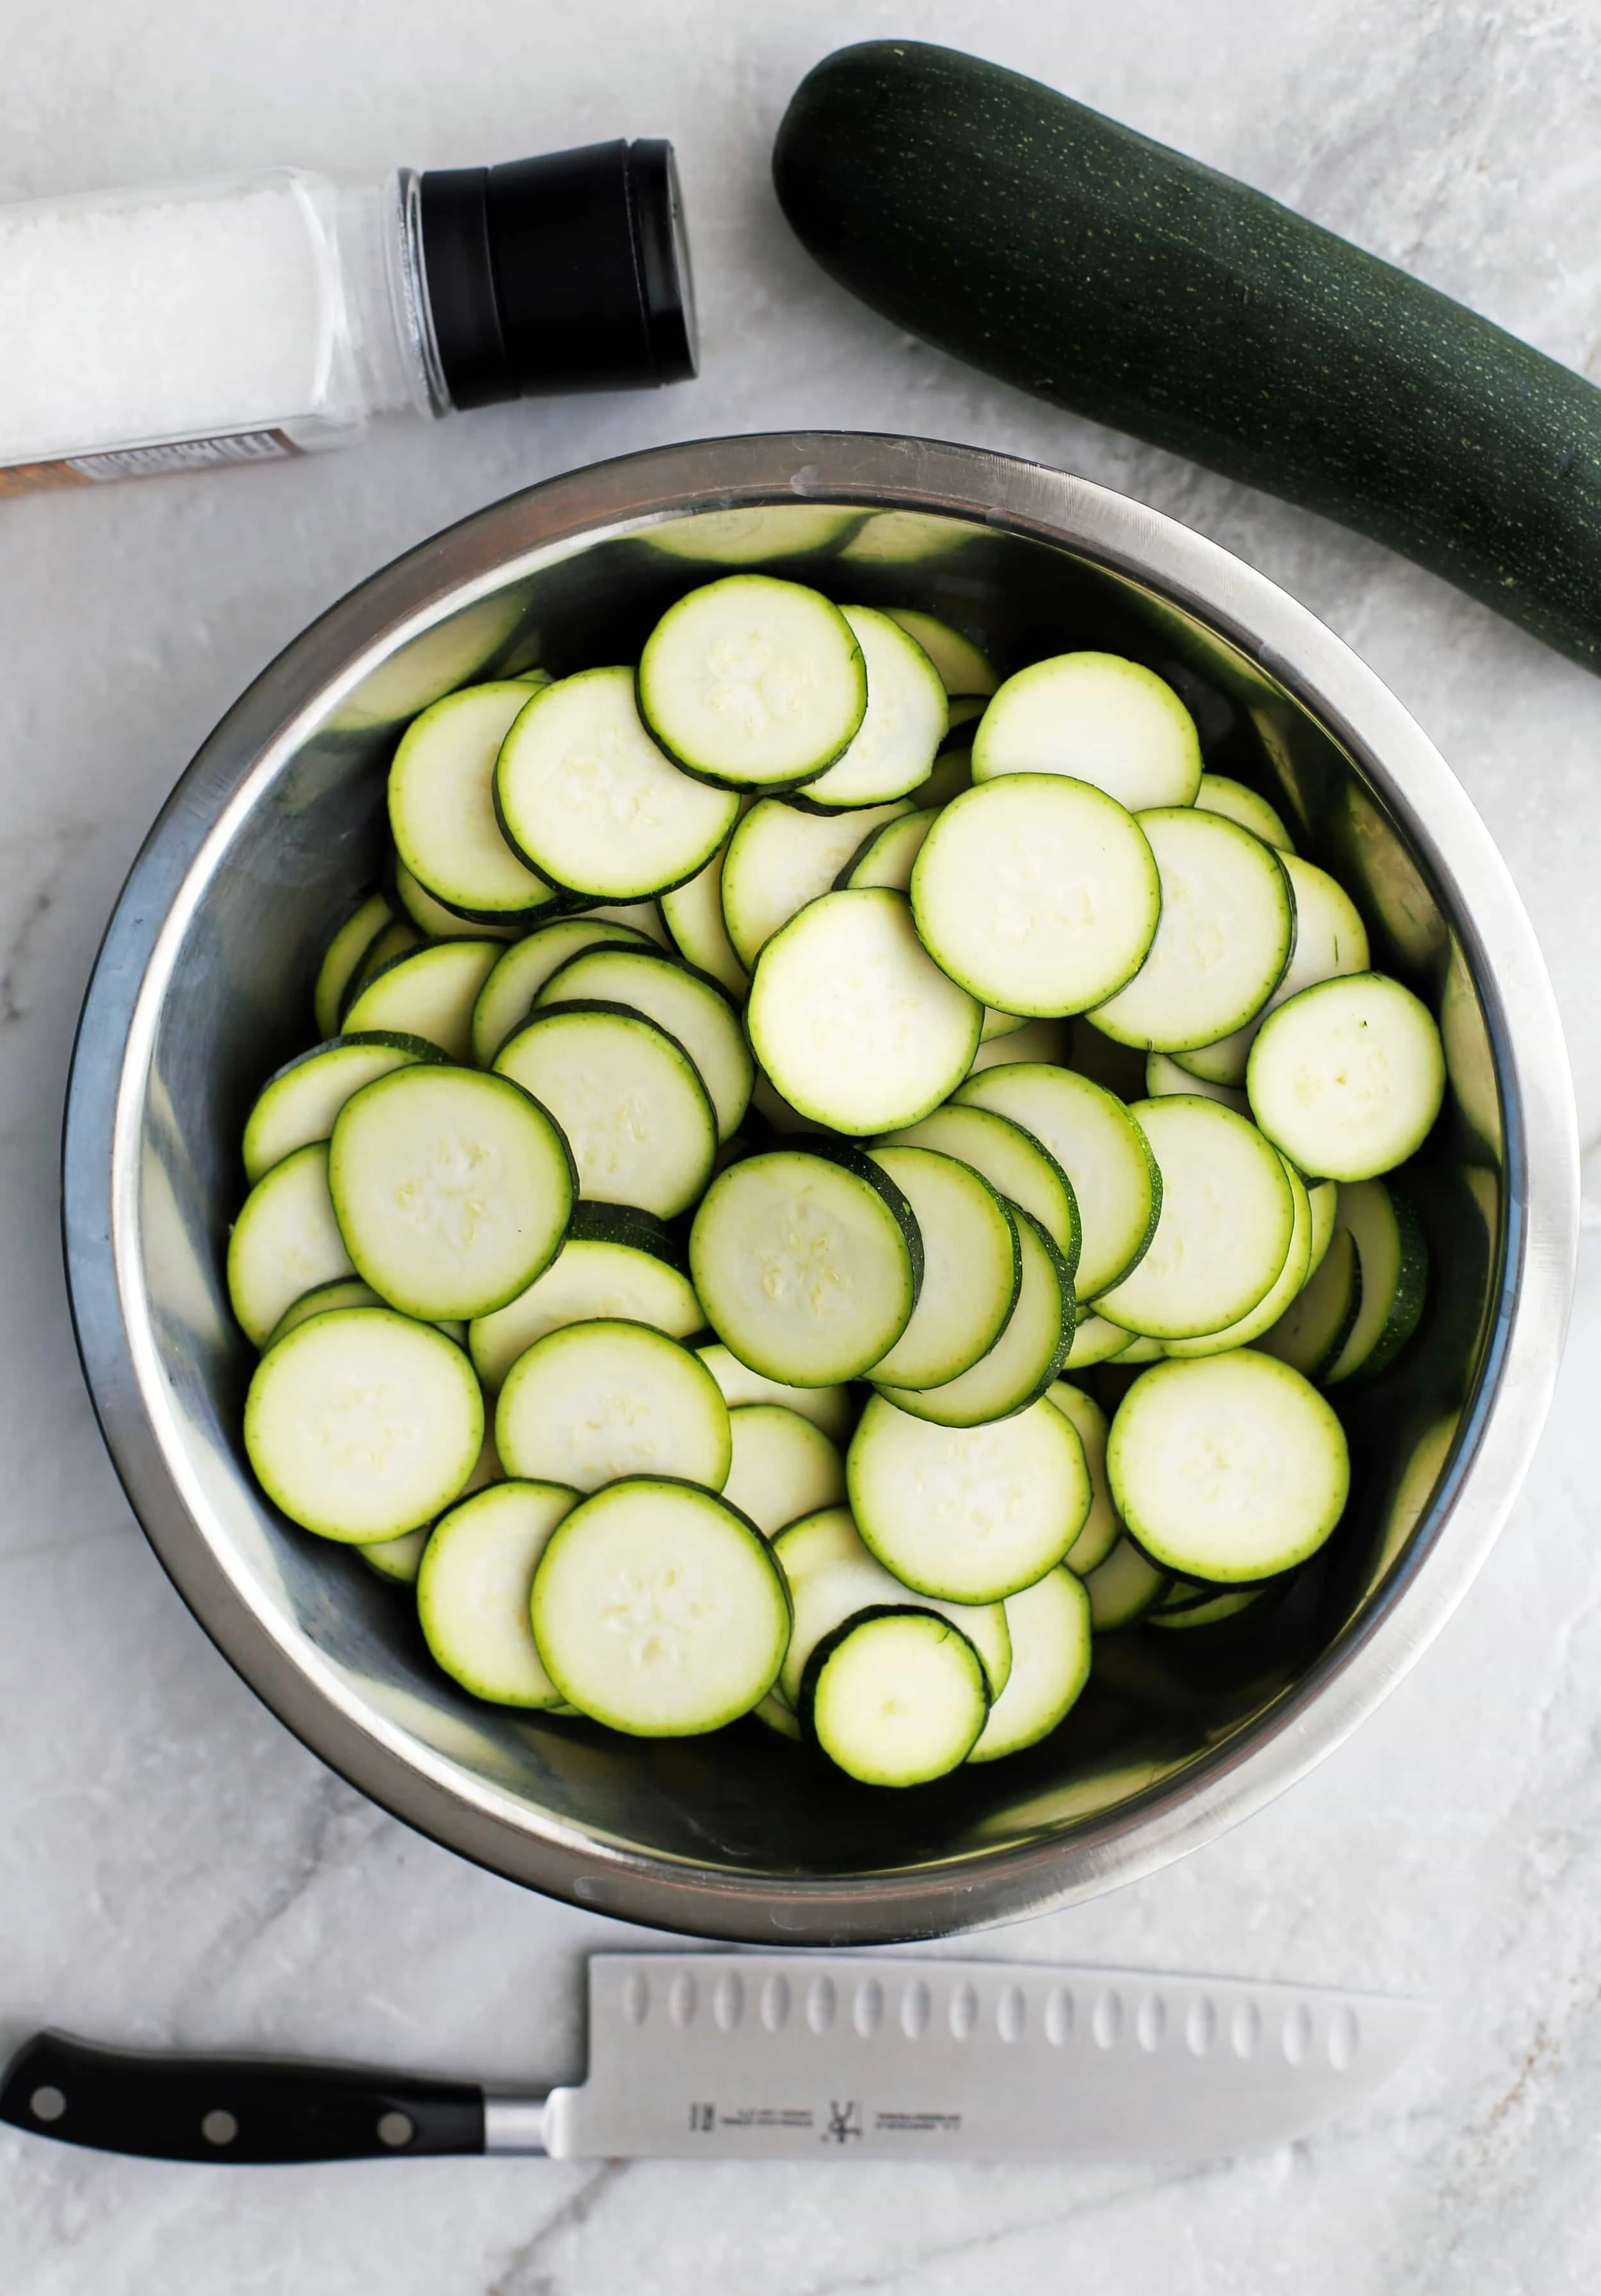 Sliced zucchini in a large metal bowl with a knife, zucchini, and salt shaker around it.